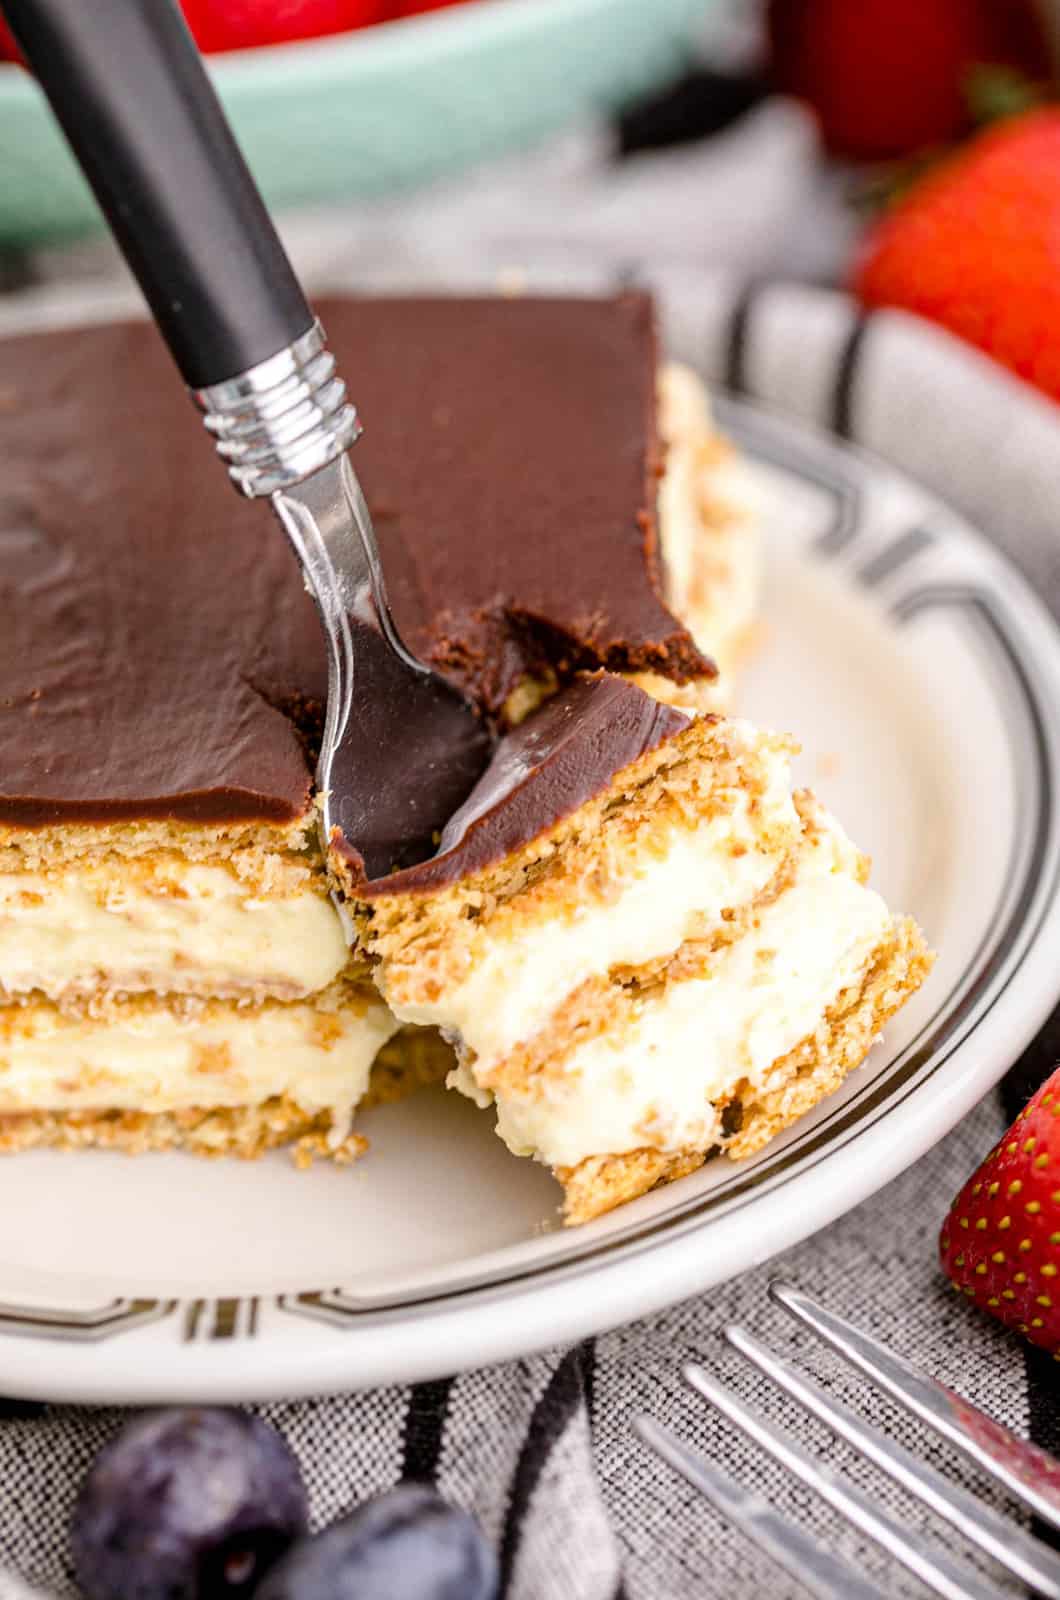 Fork going into slice of Eclair Cake removing a bite.